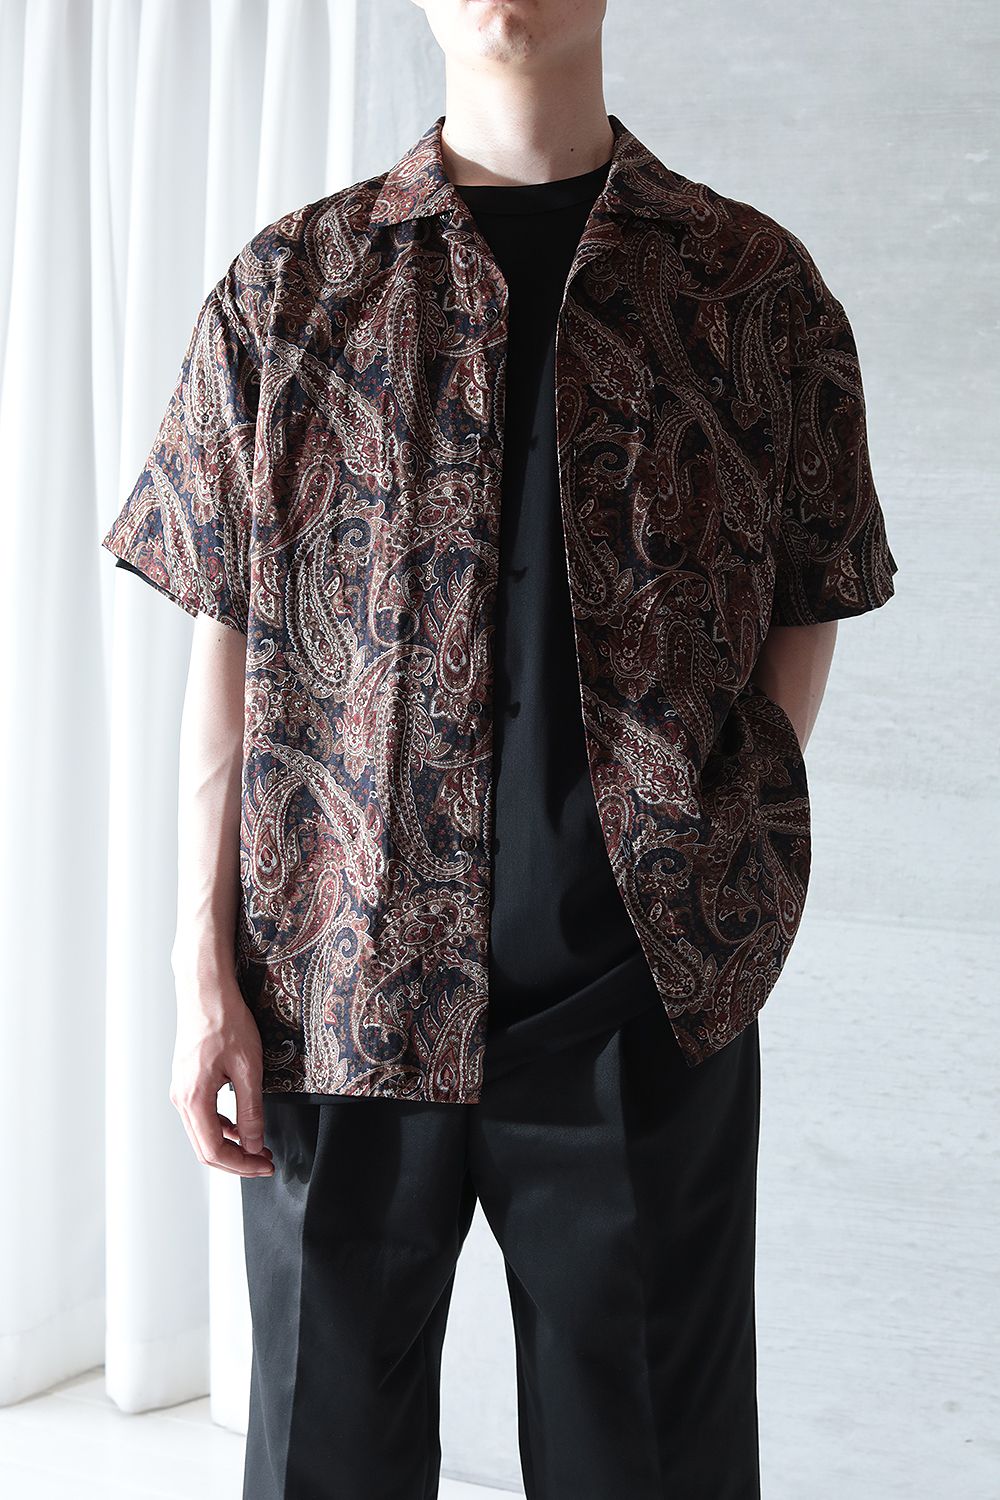 WEWILL - 【ラスト1点/再入荷】PAISLEY OPEN COLLAR DT SHIRT(BROWN